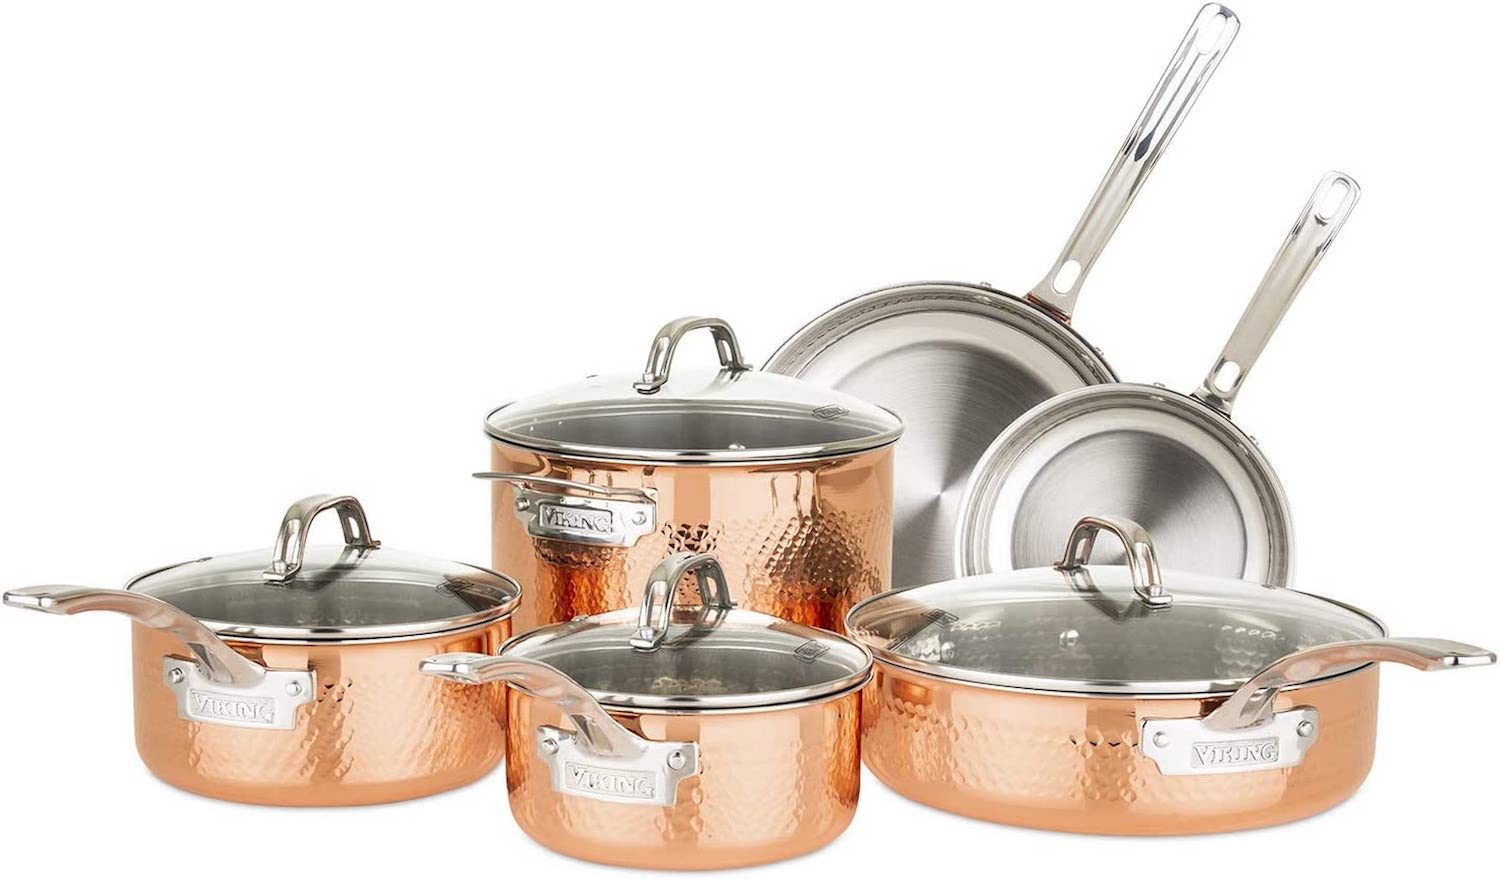 https://cdn.bestreviews.com/images/v4desktop/product-matrix/best-copper-cookware-sets-viking-culinary-3-ply-stainless-steel-hammered-copper-clad-cookware-se-3.jpg